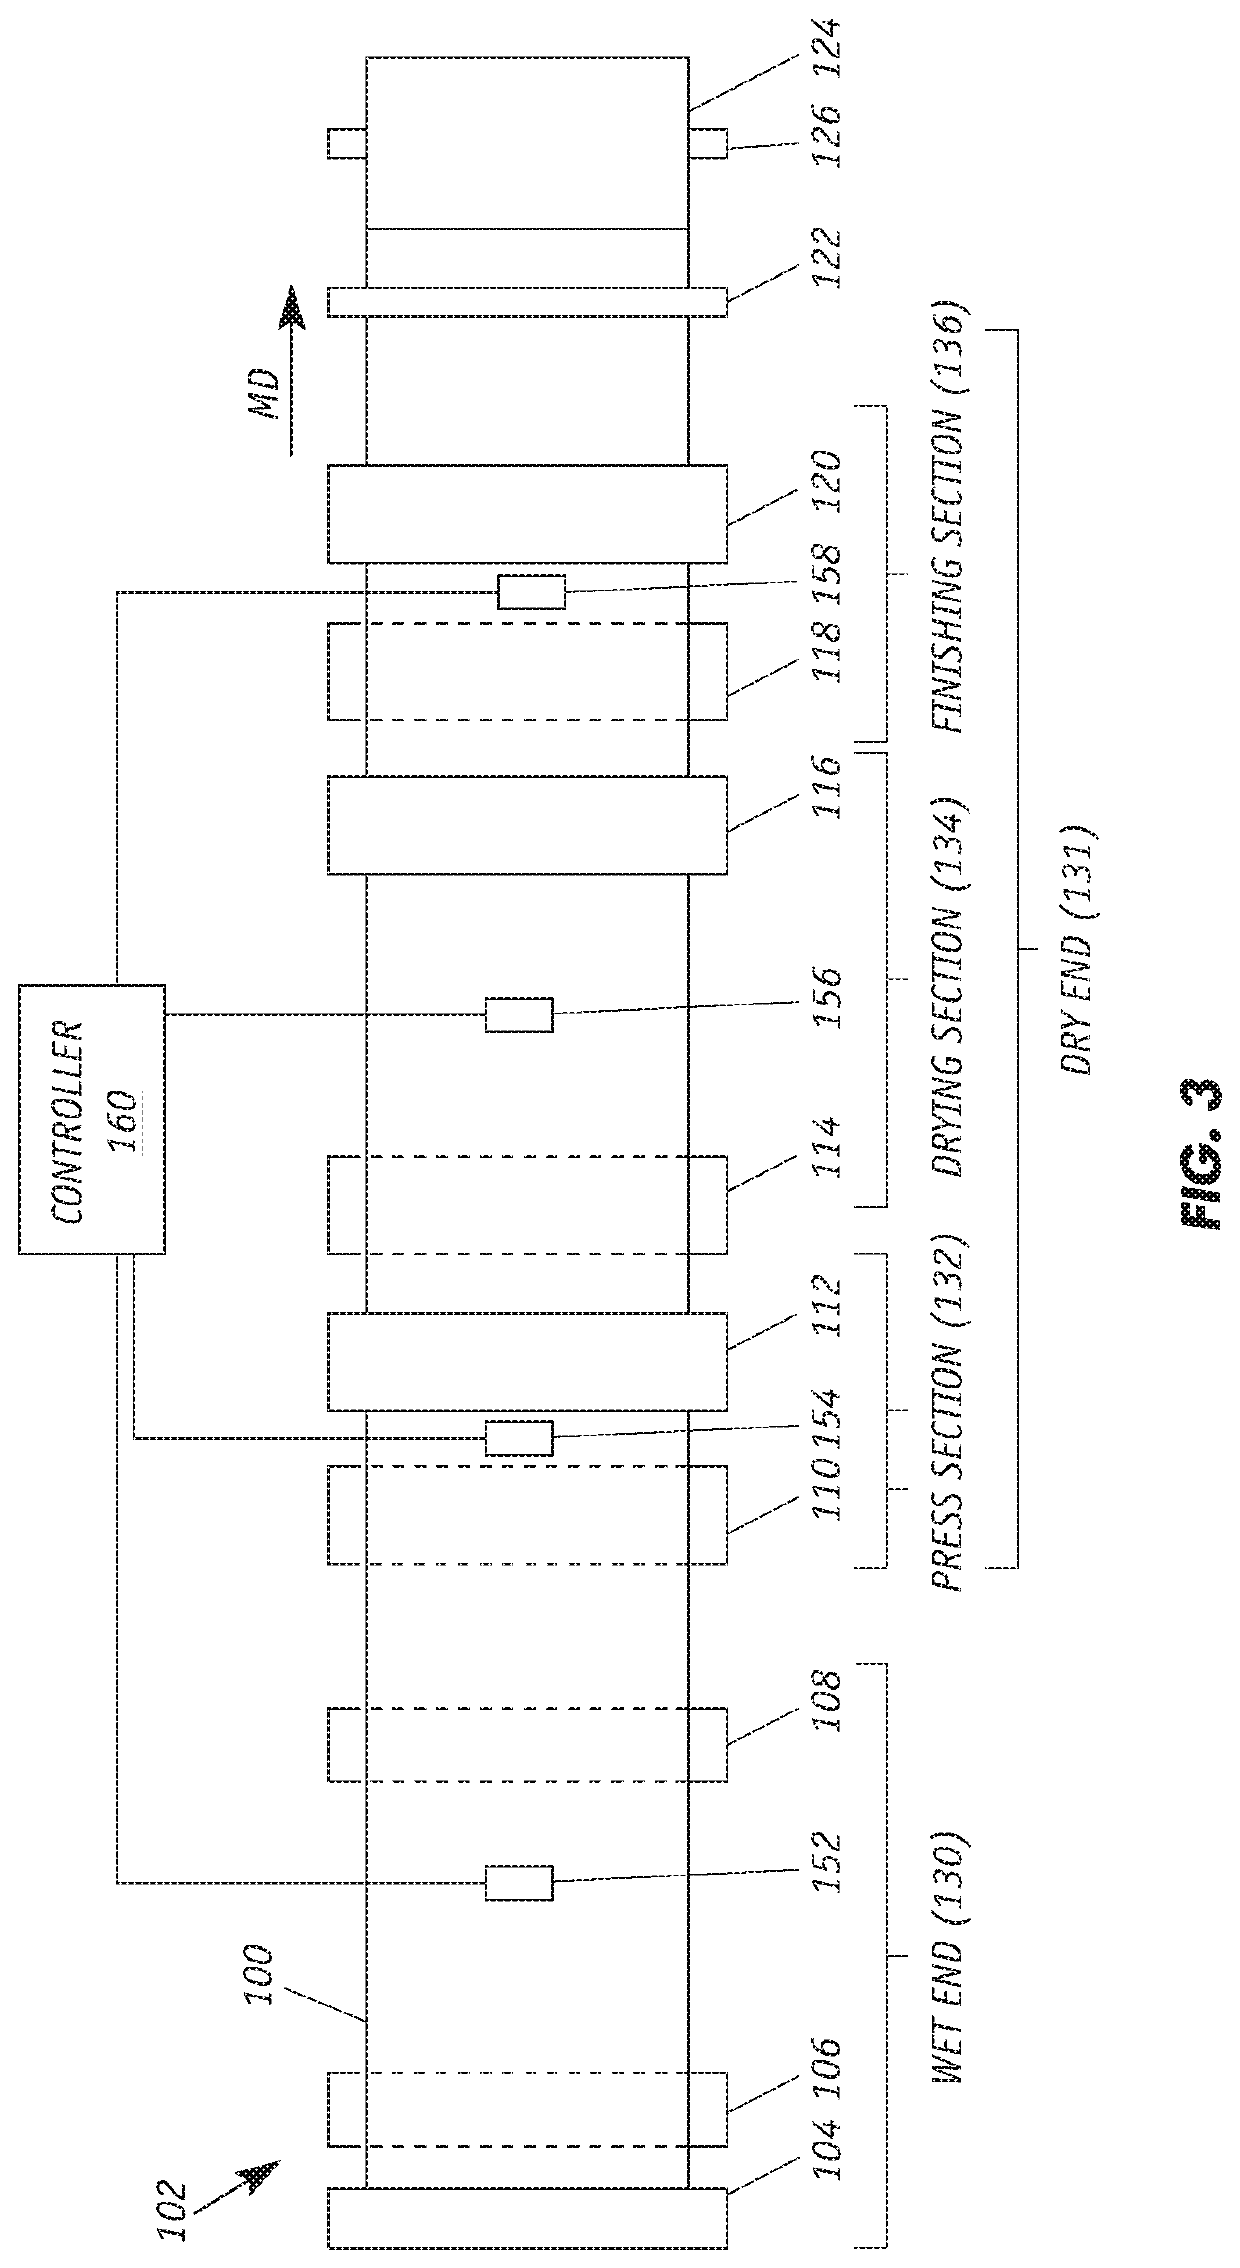 Continuous web sheet defect analytics, classification and remediation for enhancing equipment efficiency and throughput